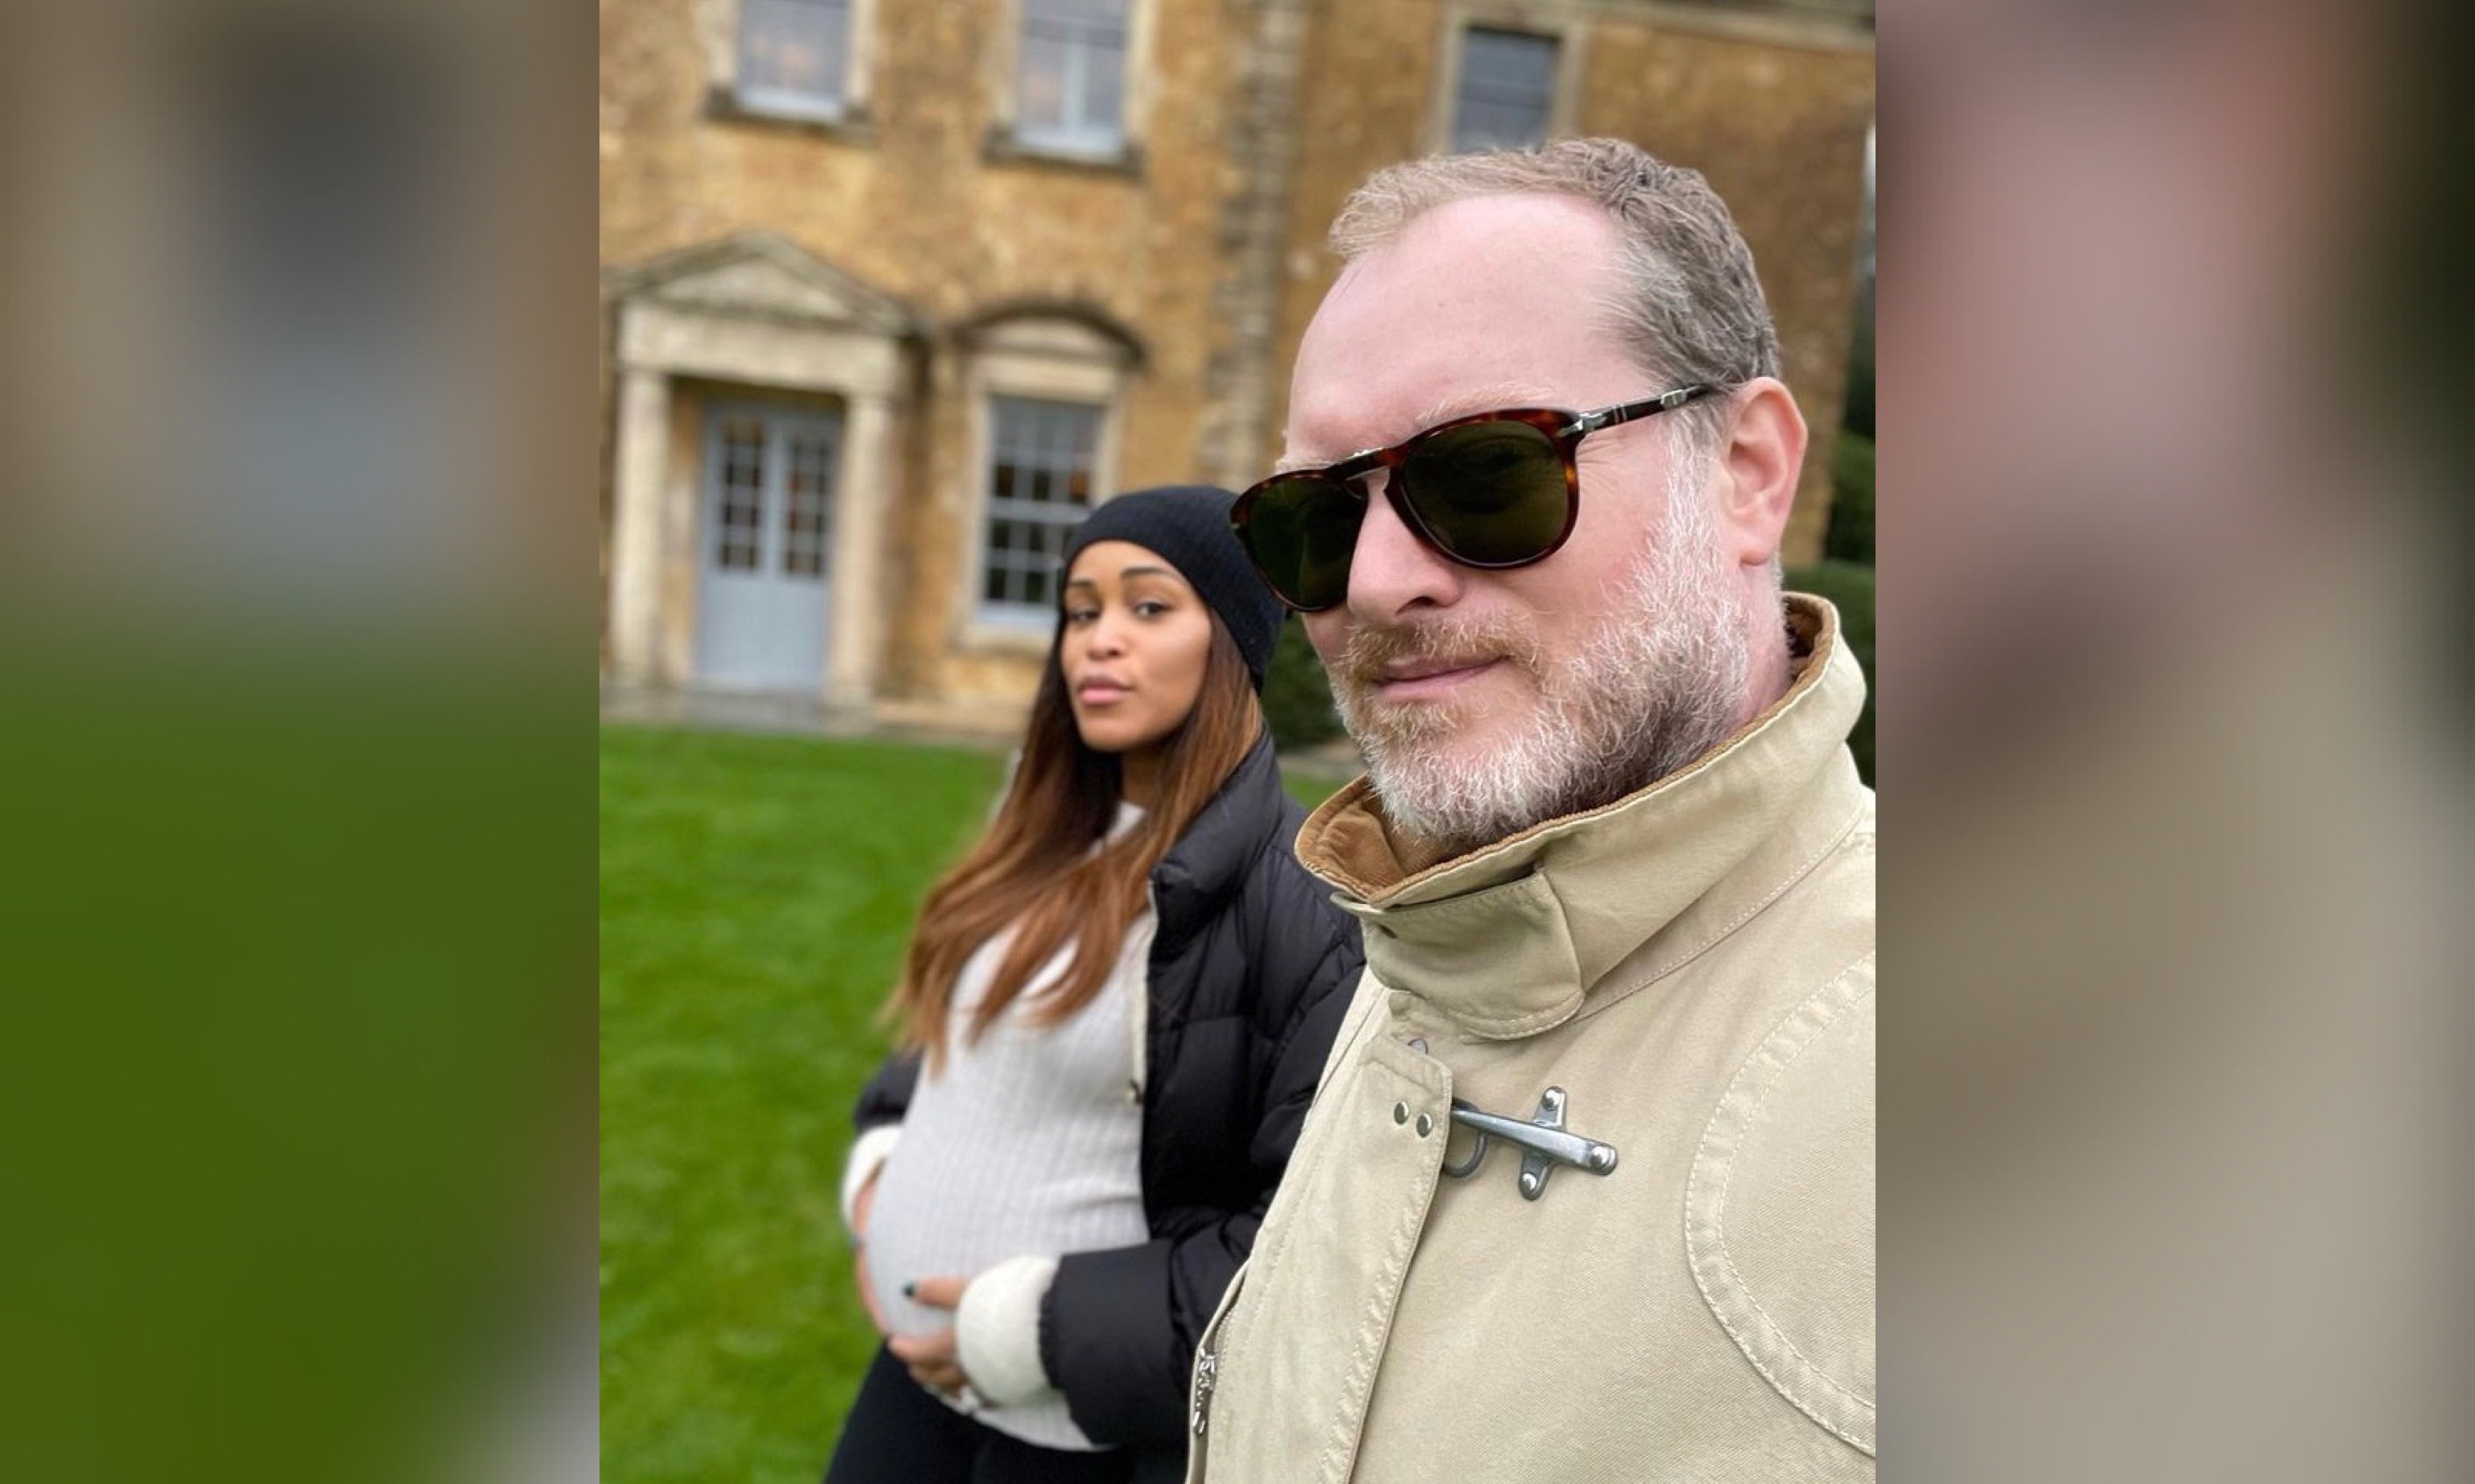 Eve and Maximillion Cooper, Husbands, Share First Look at Their Newborn Son Wilde Wolf thumbnail